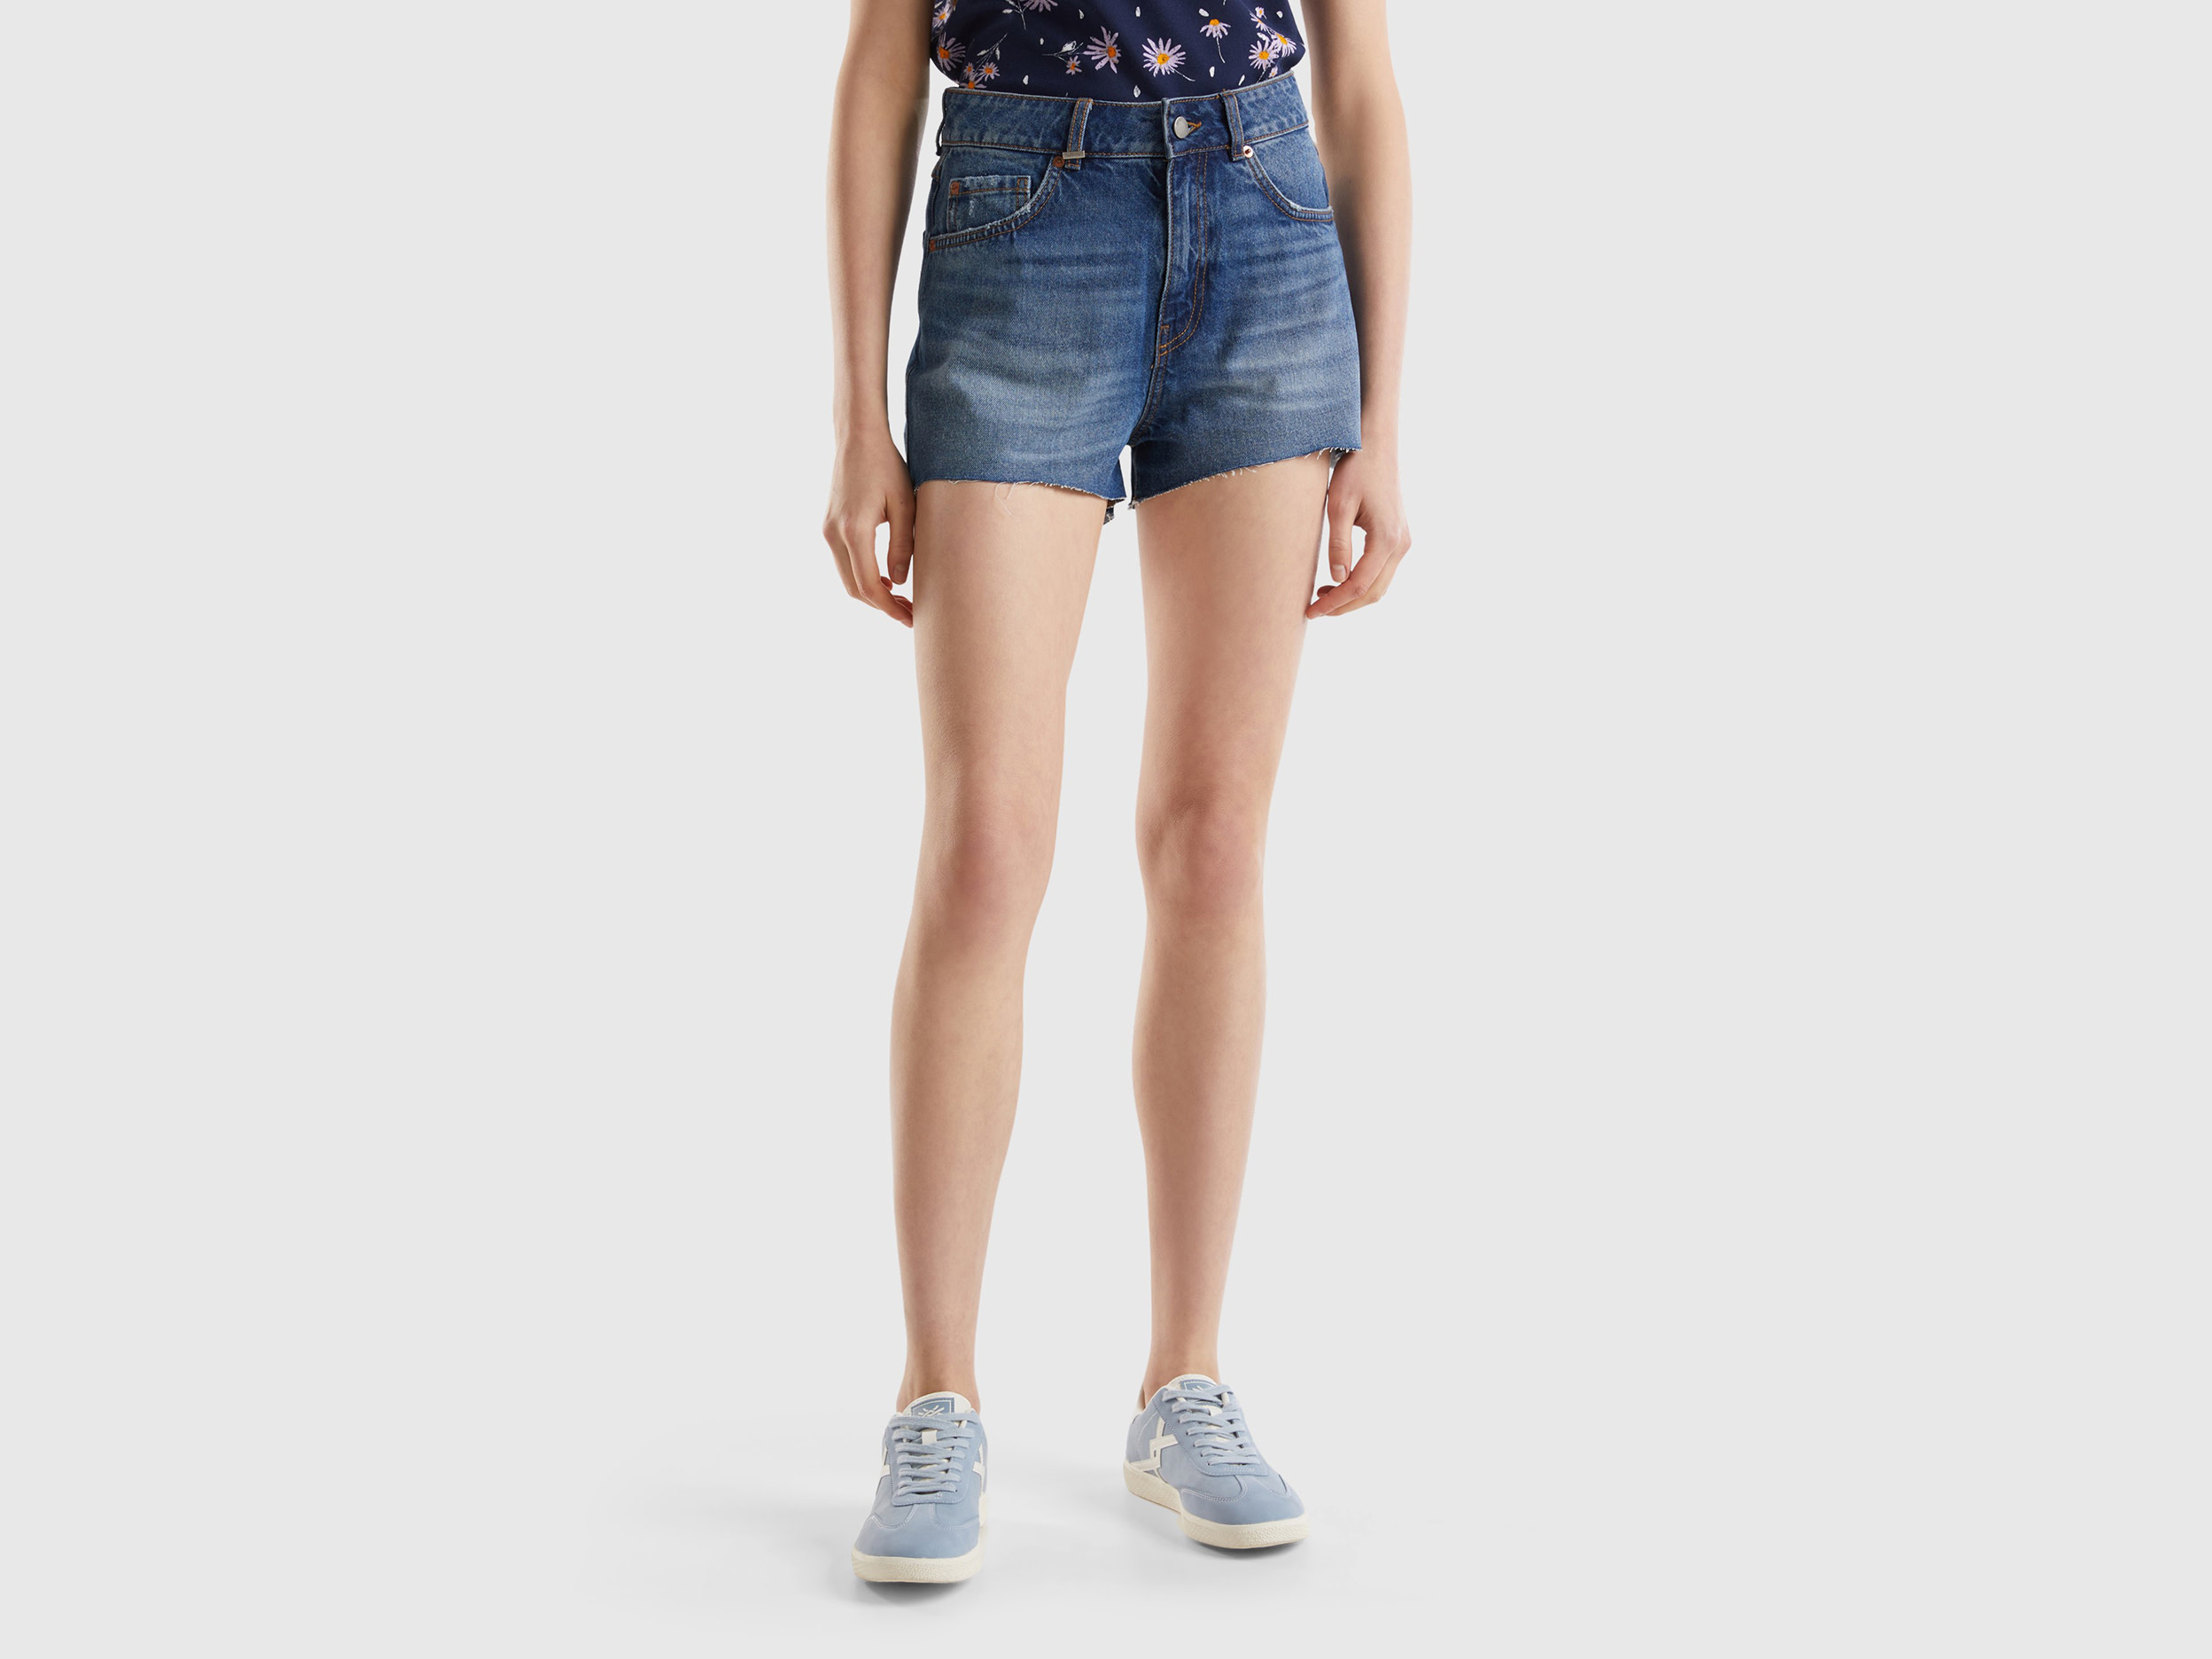 Image of Benetton, Frayed Shorts In Recycled Cotton Blend, size 29, Blue, Women